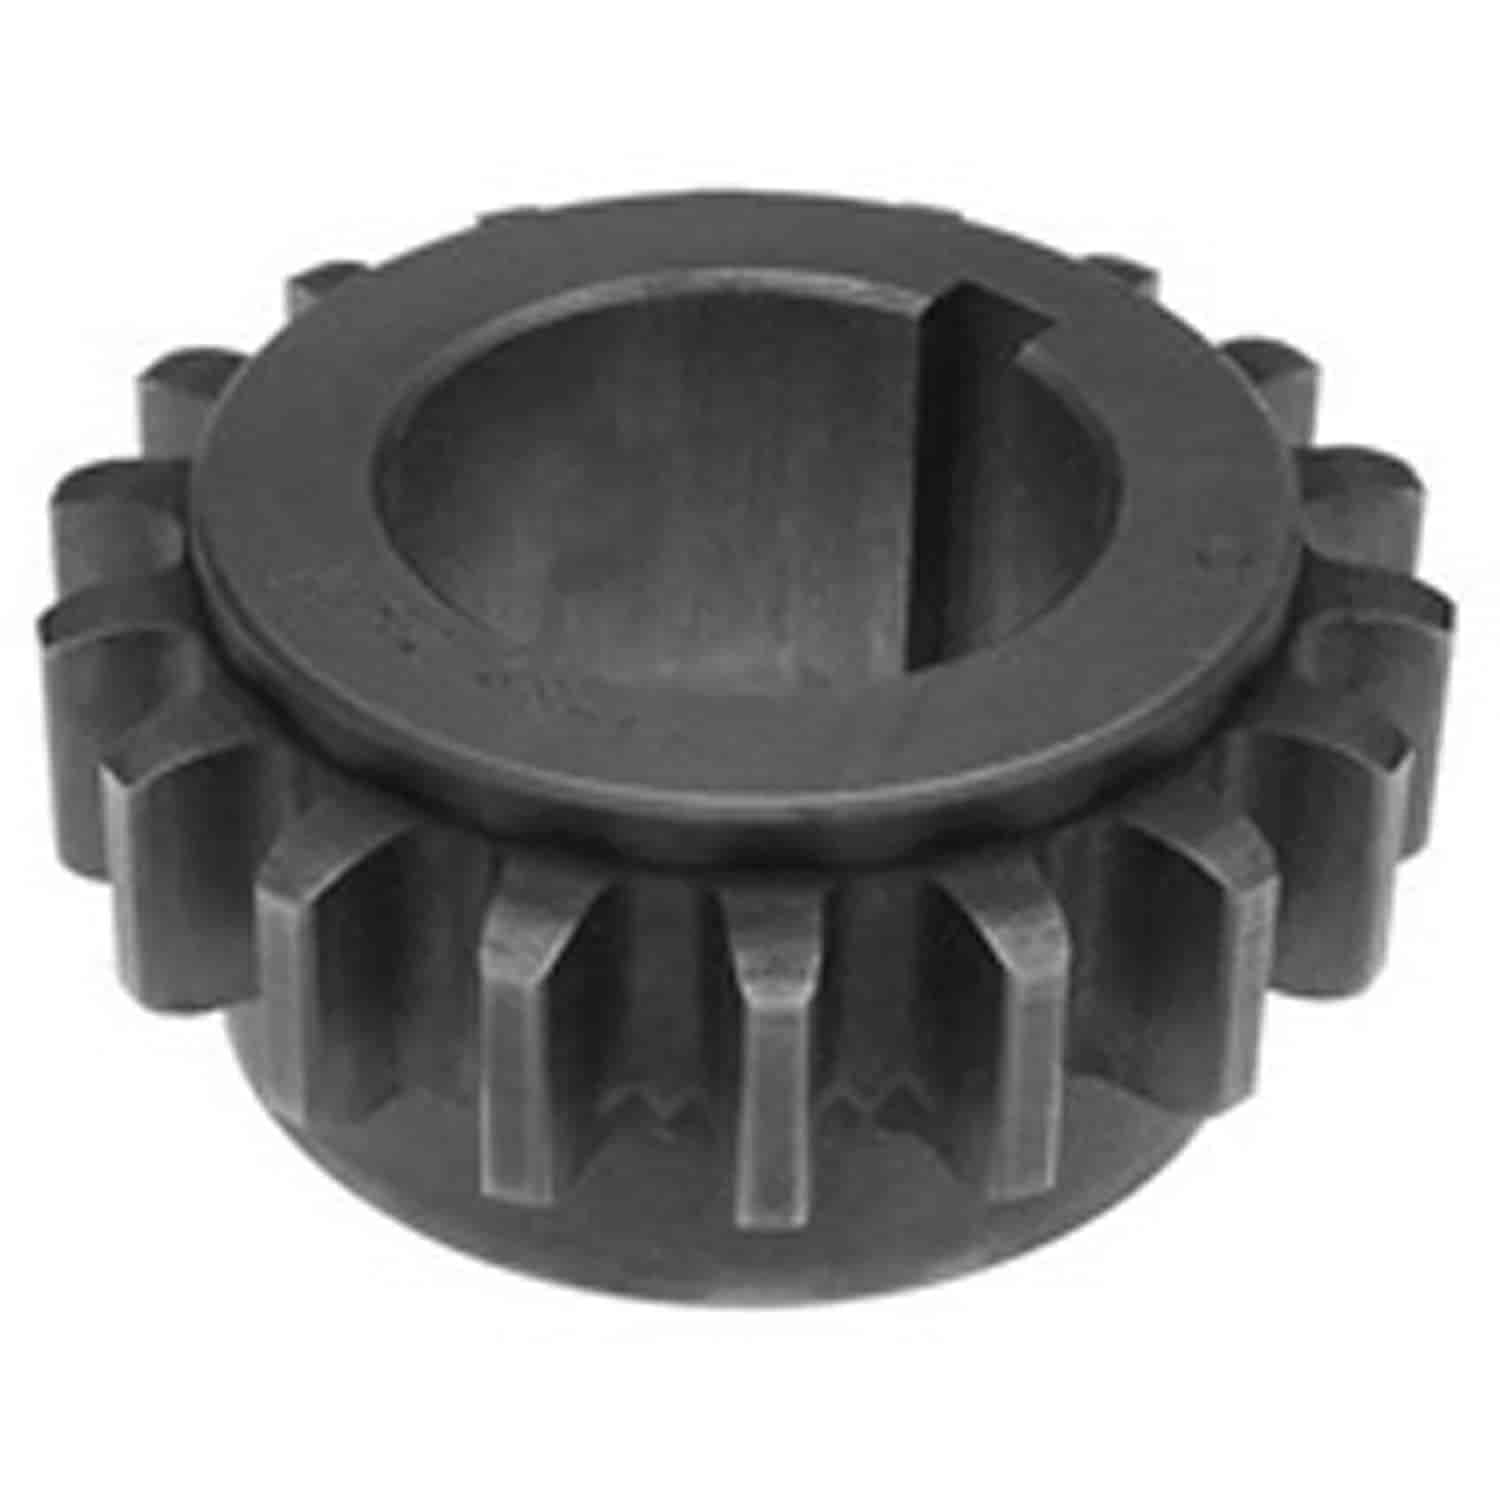 Crankshaft Timing Gear,  18 tooth for 1954-1963 Willys Jeep Pickups & Station Wagon with 226 cu in Super Hurricane Engine